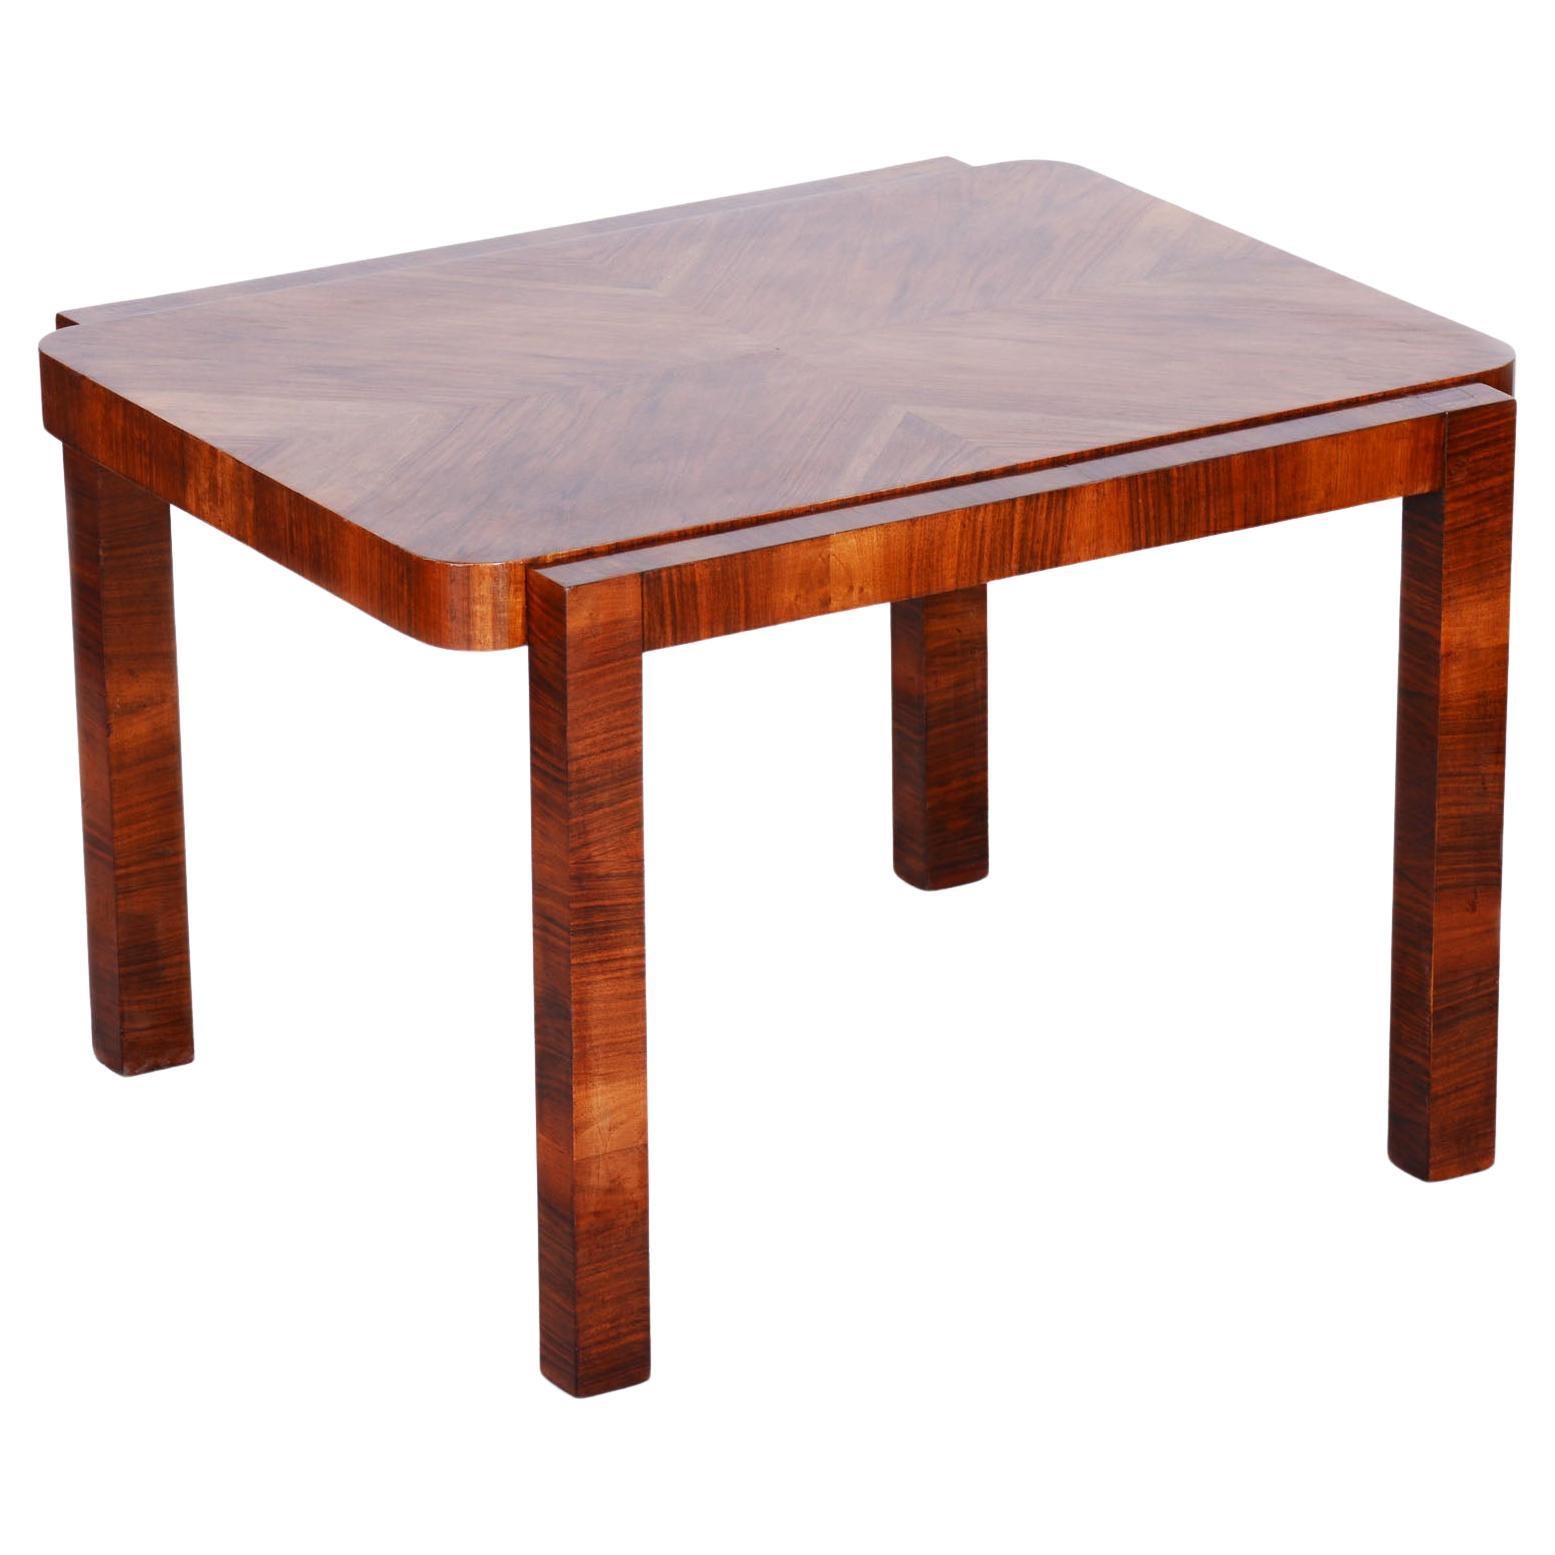 Small Art Deco Table, Made by Thonet, Walnut, Czechia, 1930s, Fully Restored For Sale